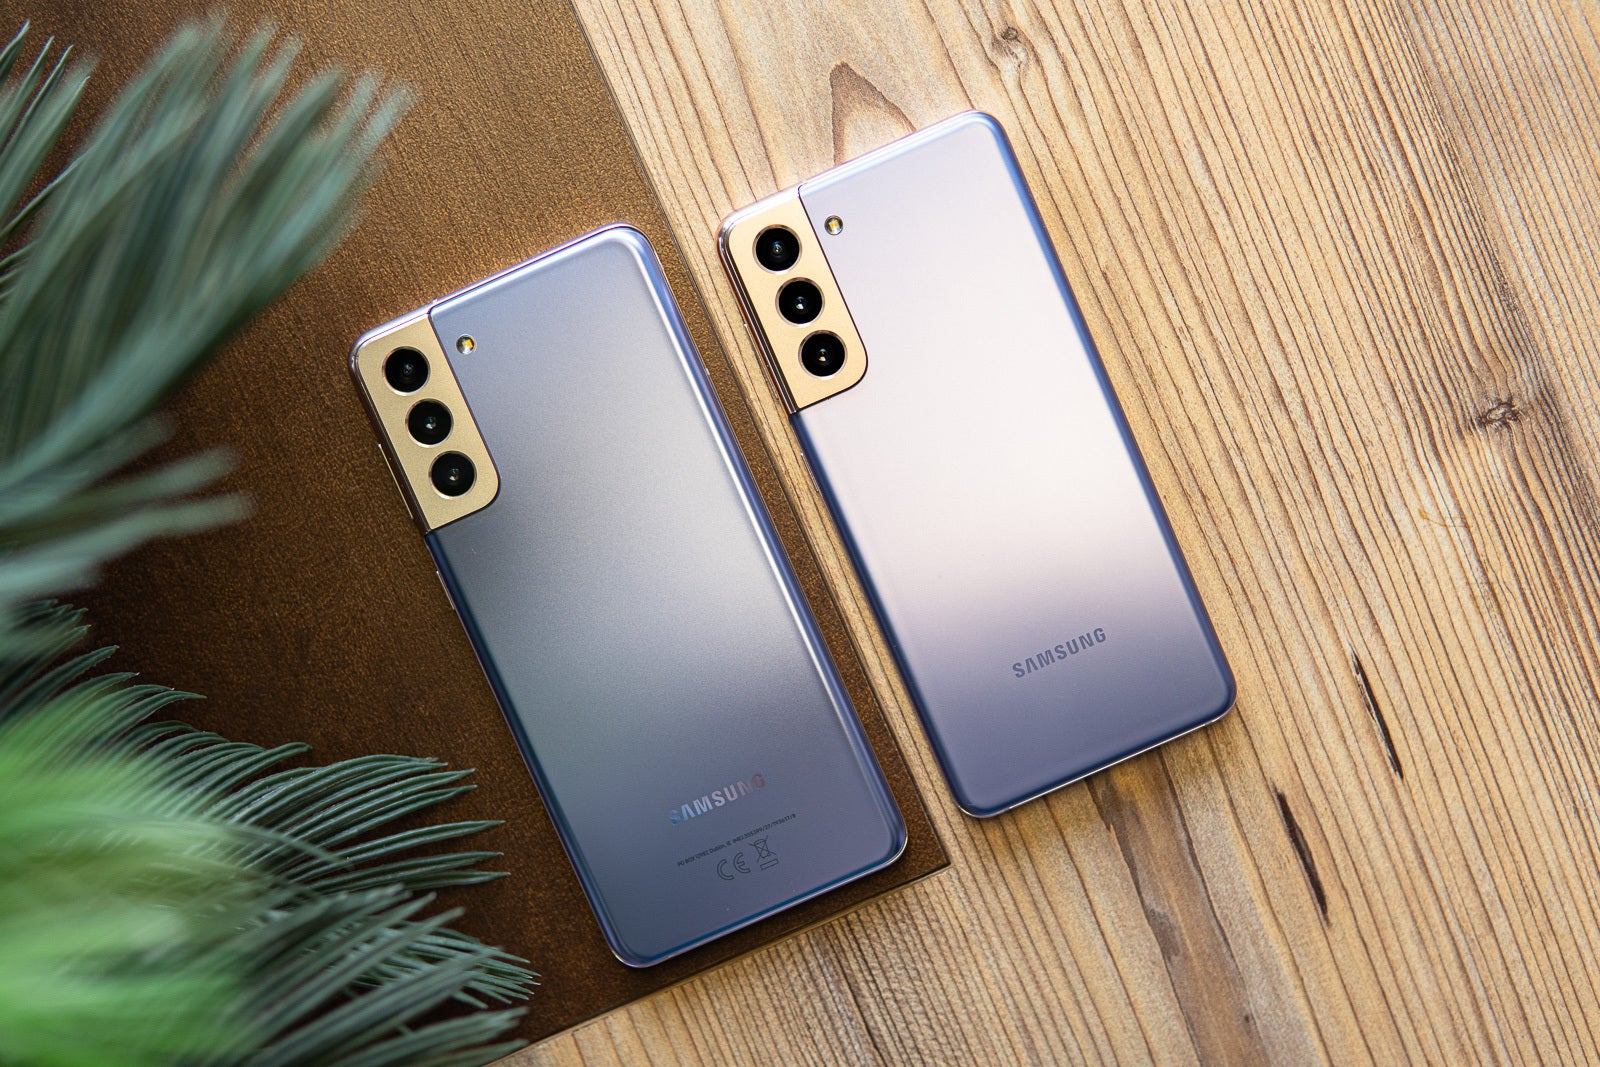 Huawei accounted for just 4% of smartphone shipments in Q1 2021